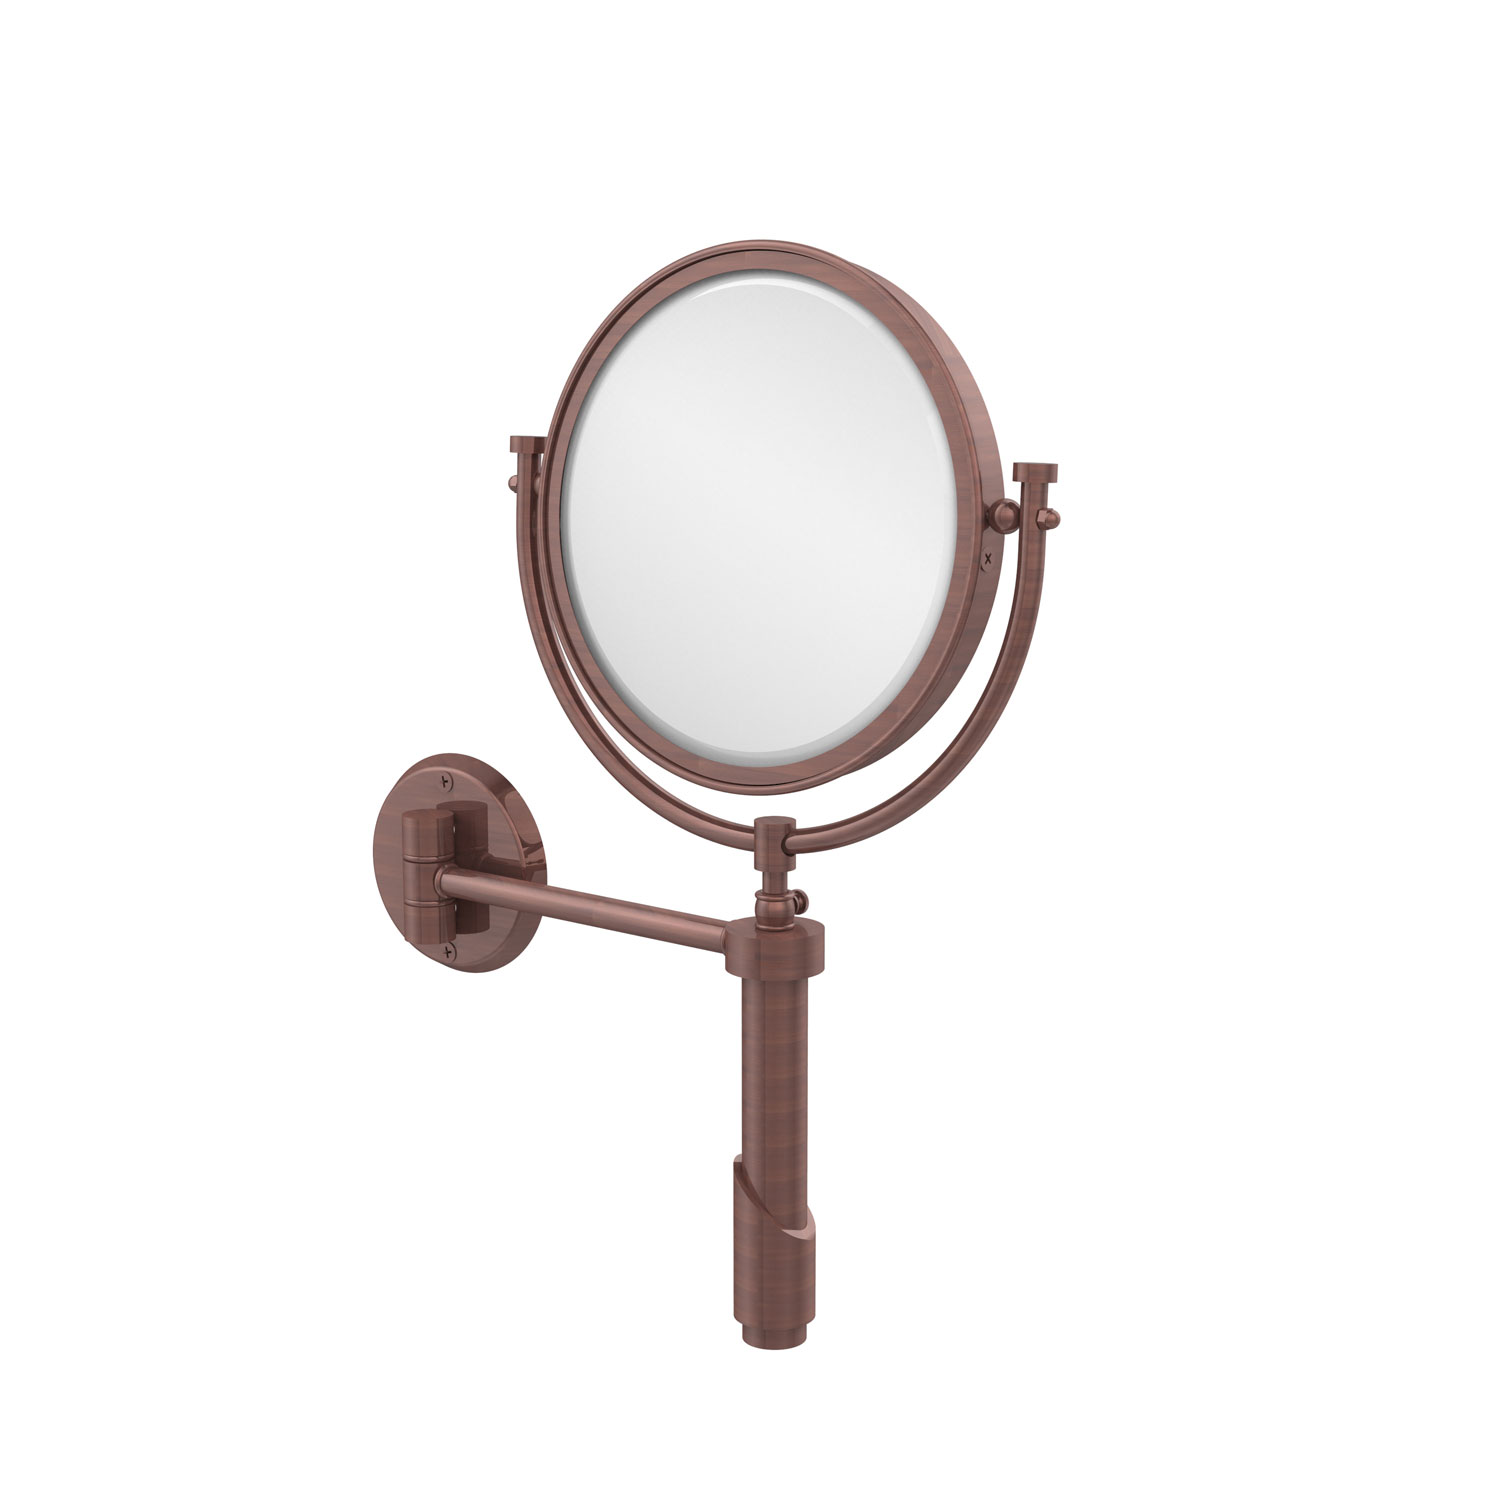 Tribecca Collection Wall Mounted Make-Up Mirror 8 Inch Diameter With 3X Magnification, Antique Copper